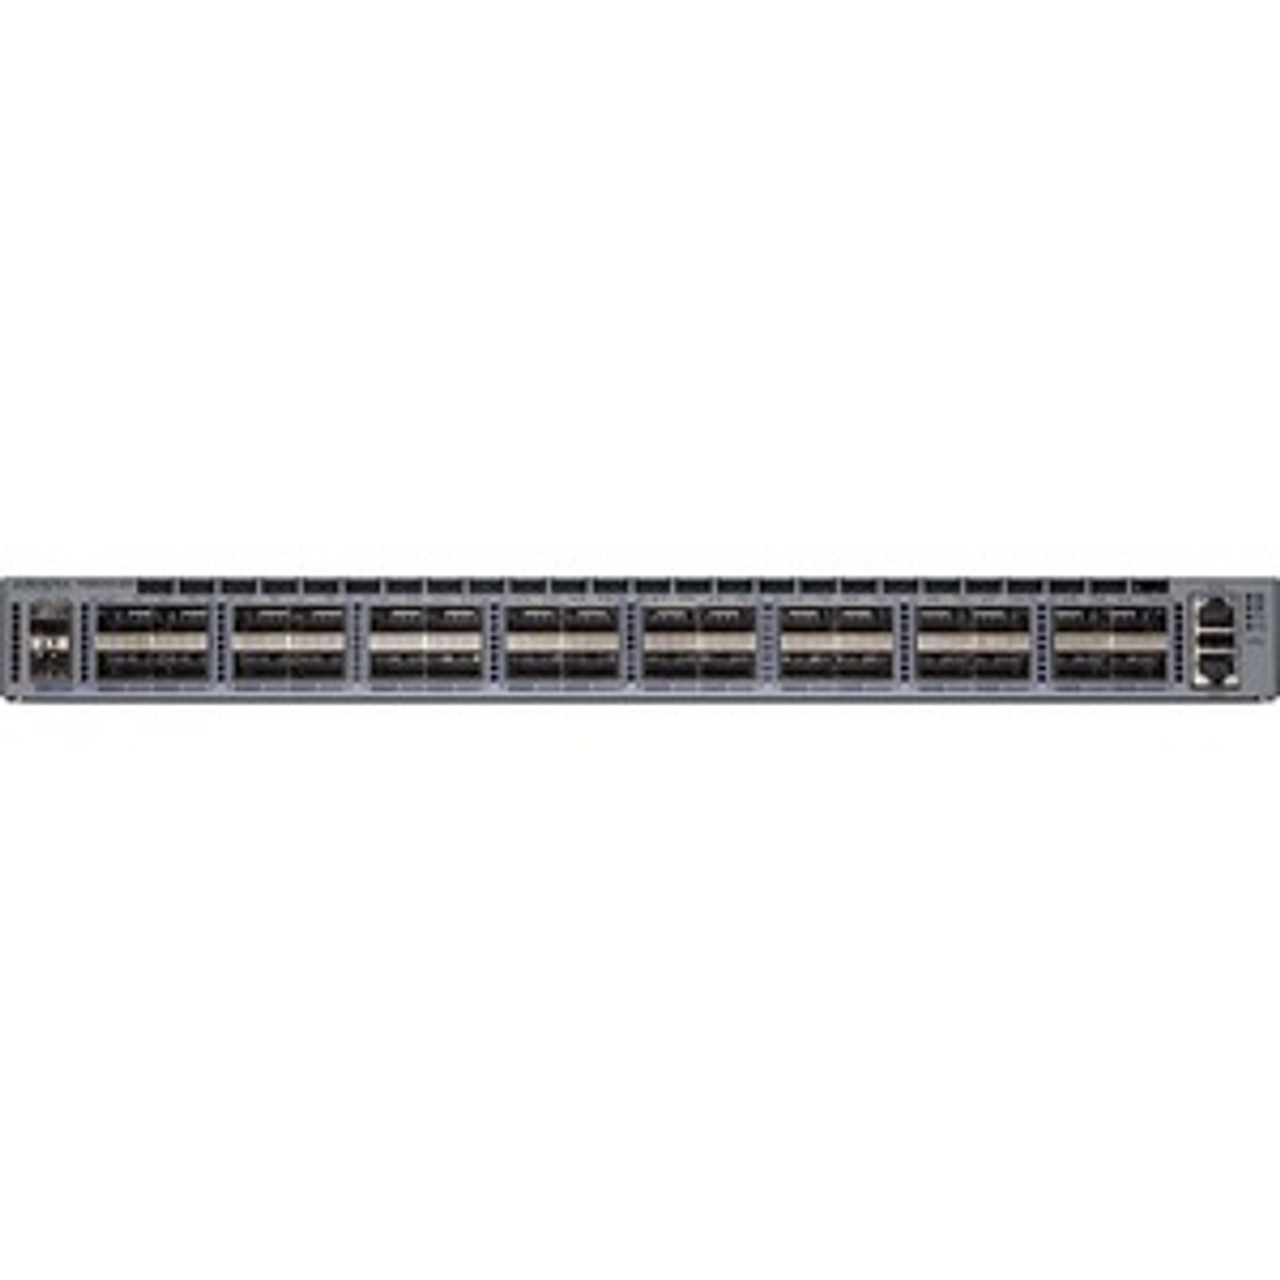 DCS-7050CX3-32S-R Arista Networks 7050CX3-32S Layer 3 Switch - Manageable - 40 Gigabit Ethernet - 100GBase-X - 3 Layer Supported - Modular - Power Supply - Optical